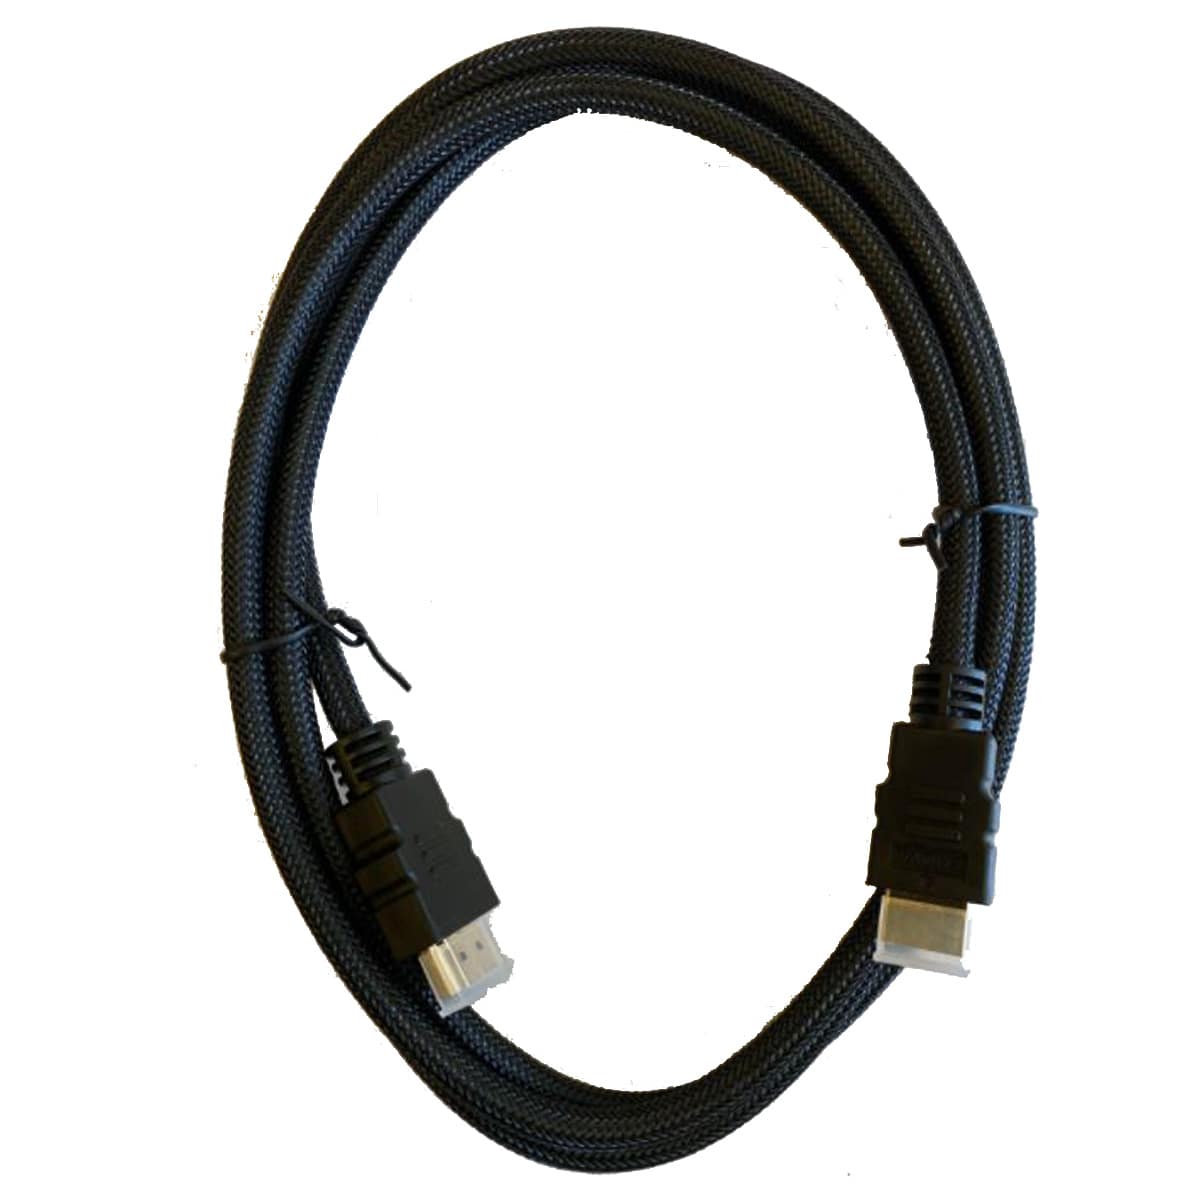 CABLE HDMI-5.0-FL 5 m - HDMI Cables up to 5 m Length - Delta